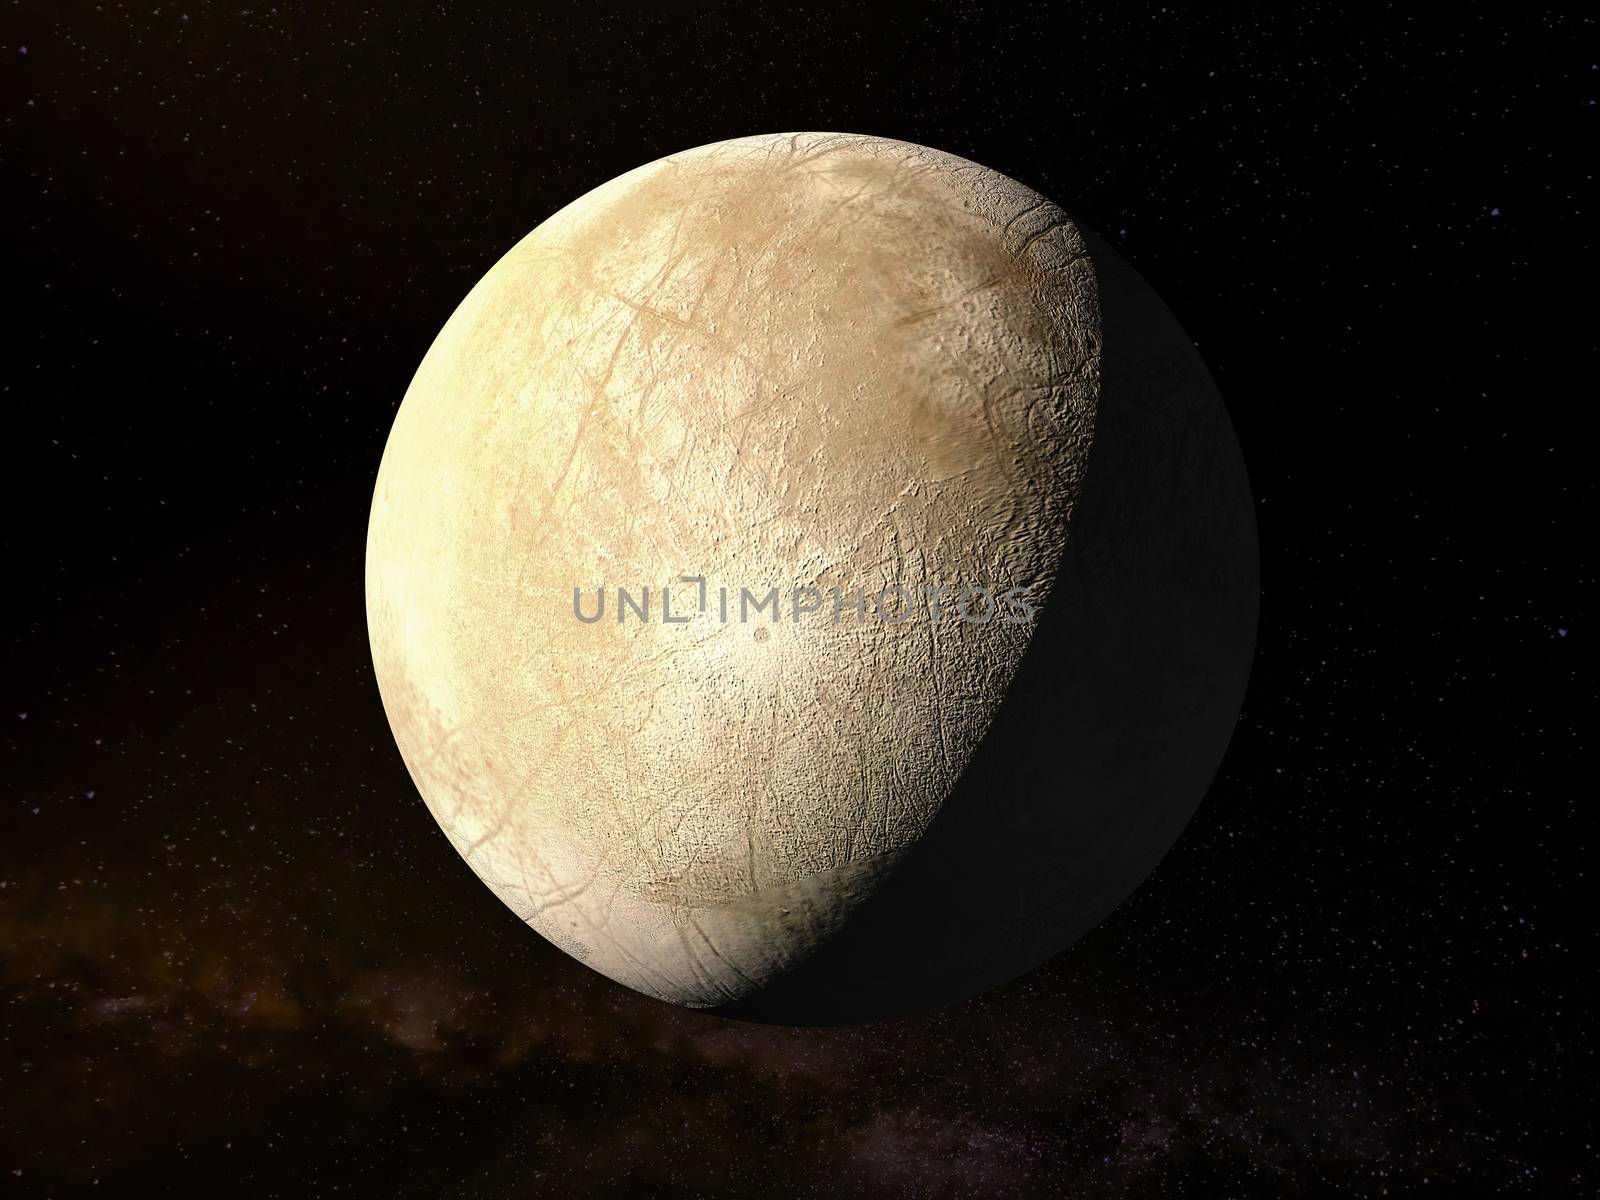 Jupiter moon Europe - High resolution 3D Rendering images presents planets of the solar system. This image elements furnished by NASA